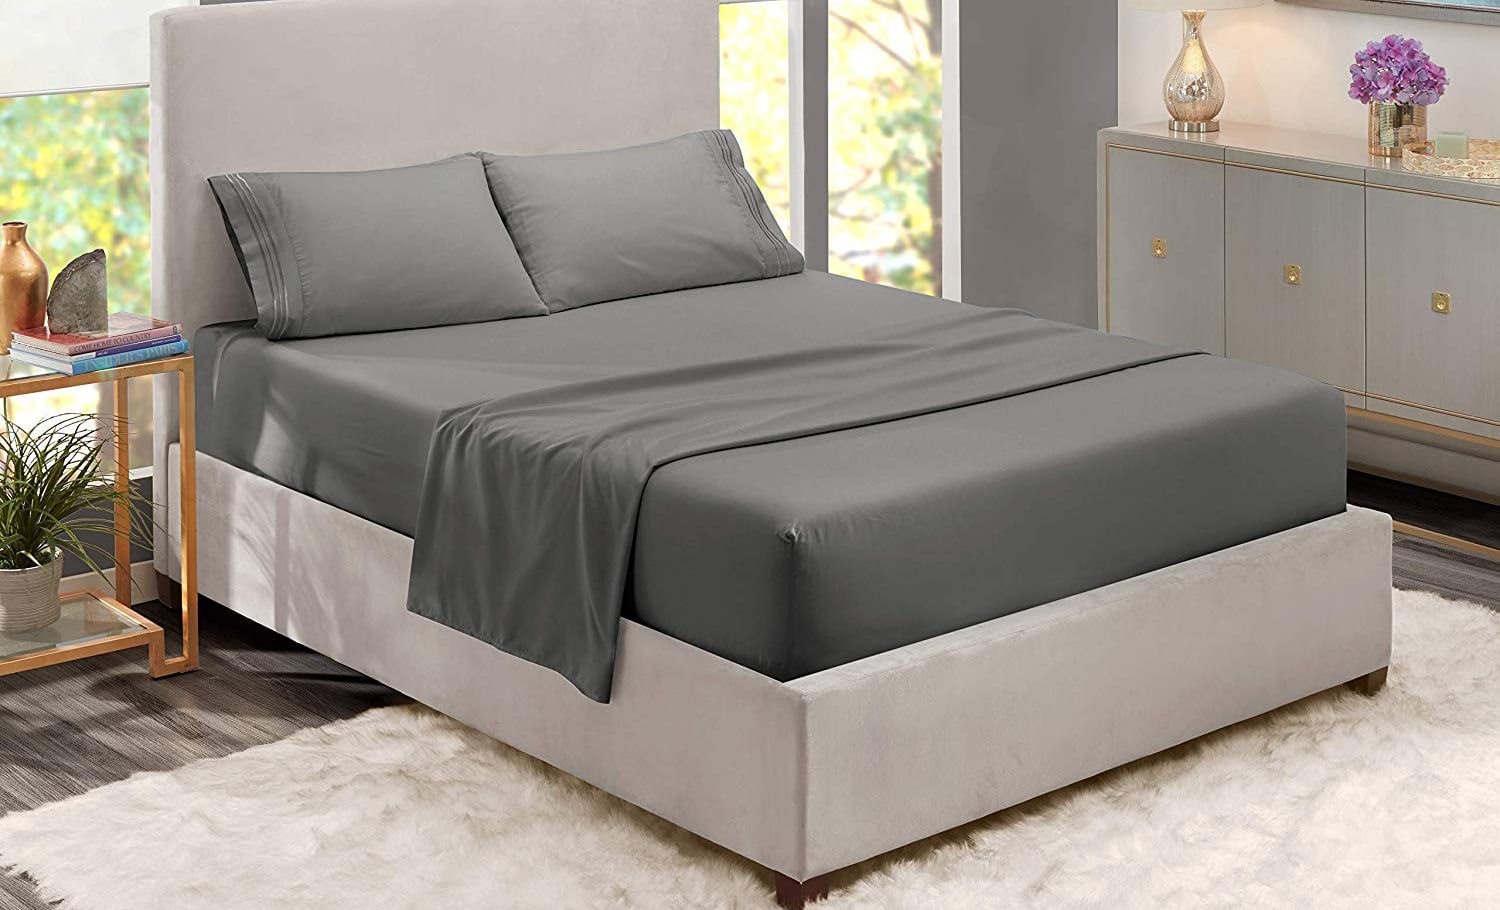 Top 10 Best Sheet Sets in 2021 Reviews Guides.